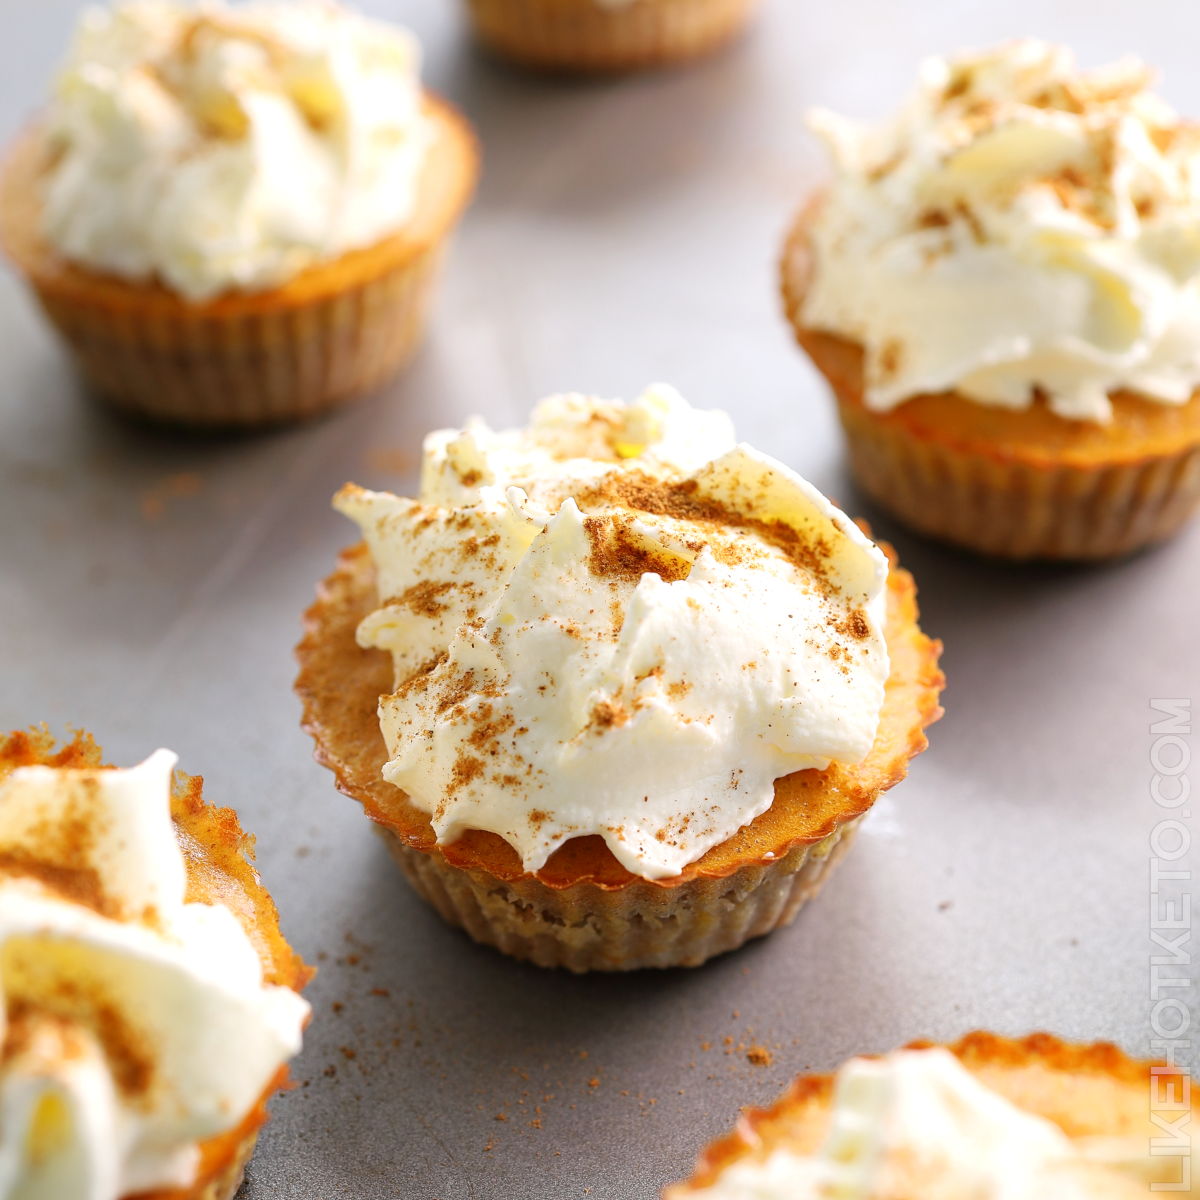 Mini keto pumpkin protein pies topped with whipped cream and cinnamon powder.